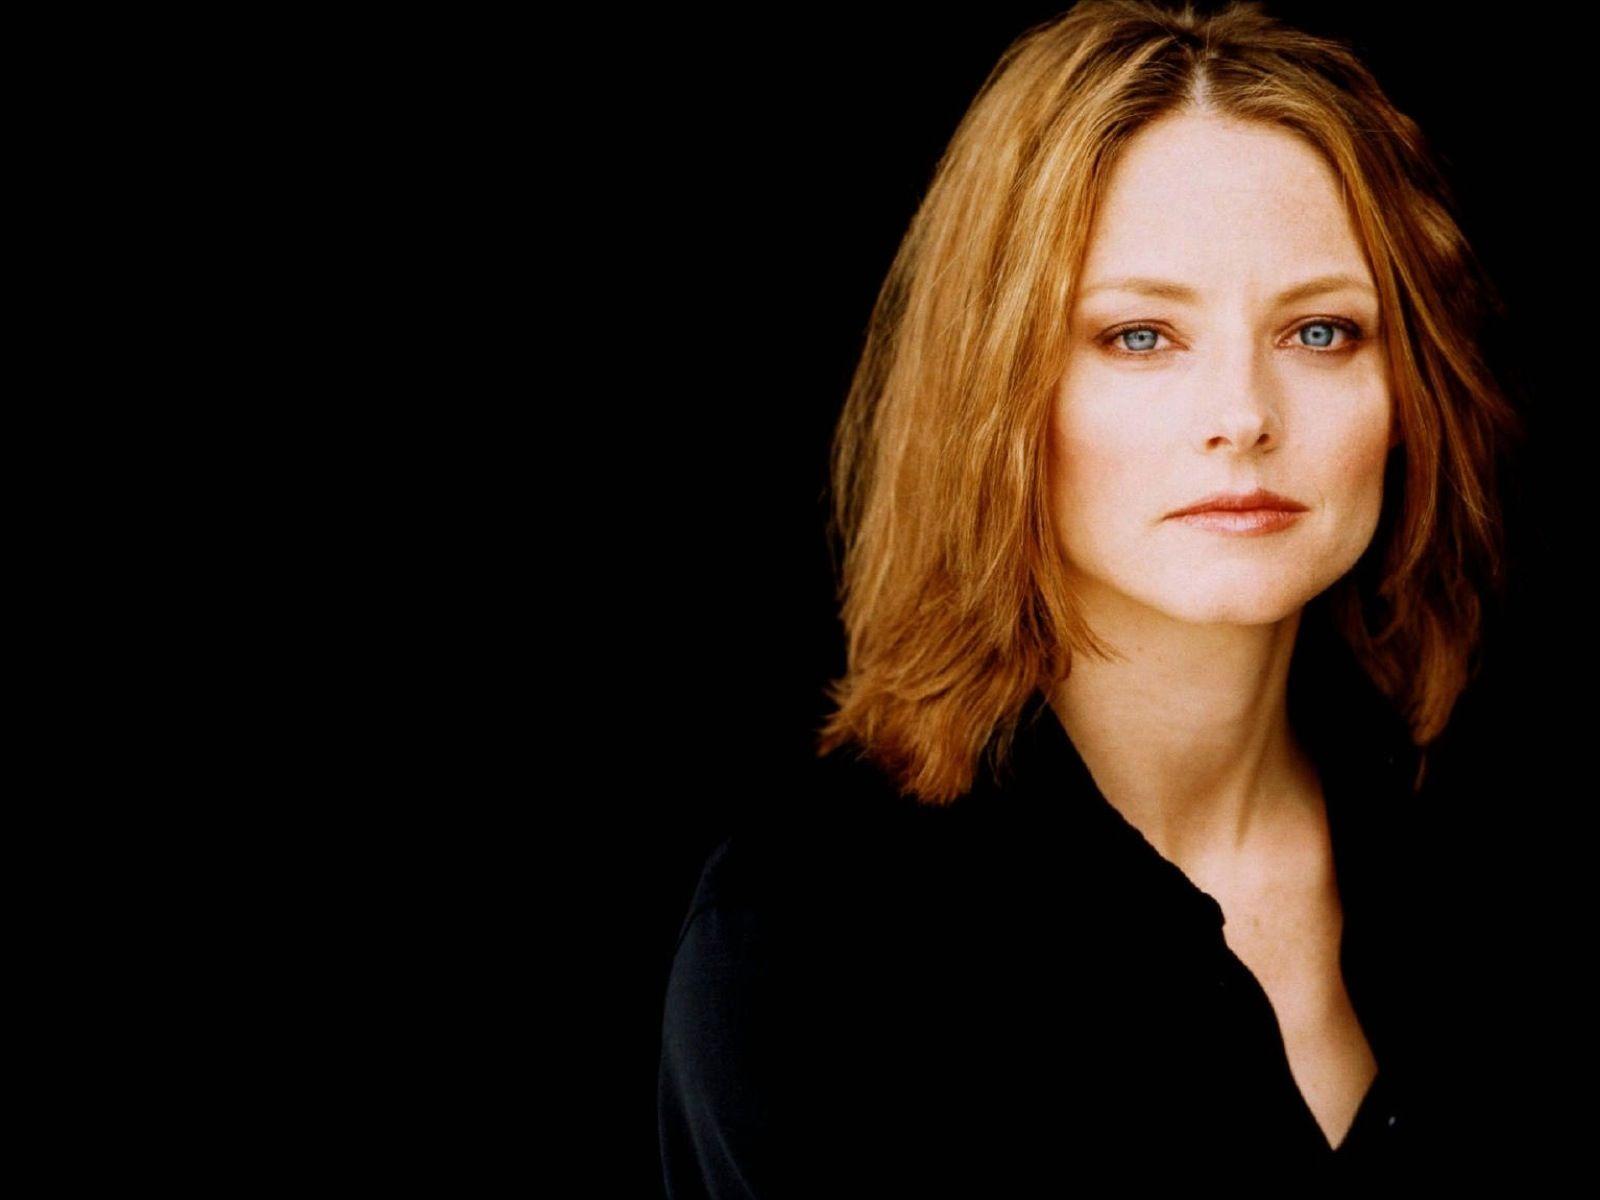 Jodie foster young hot